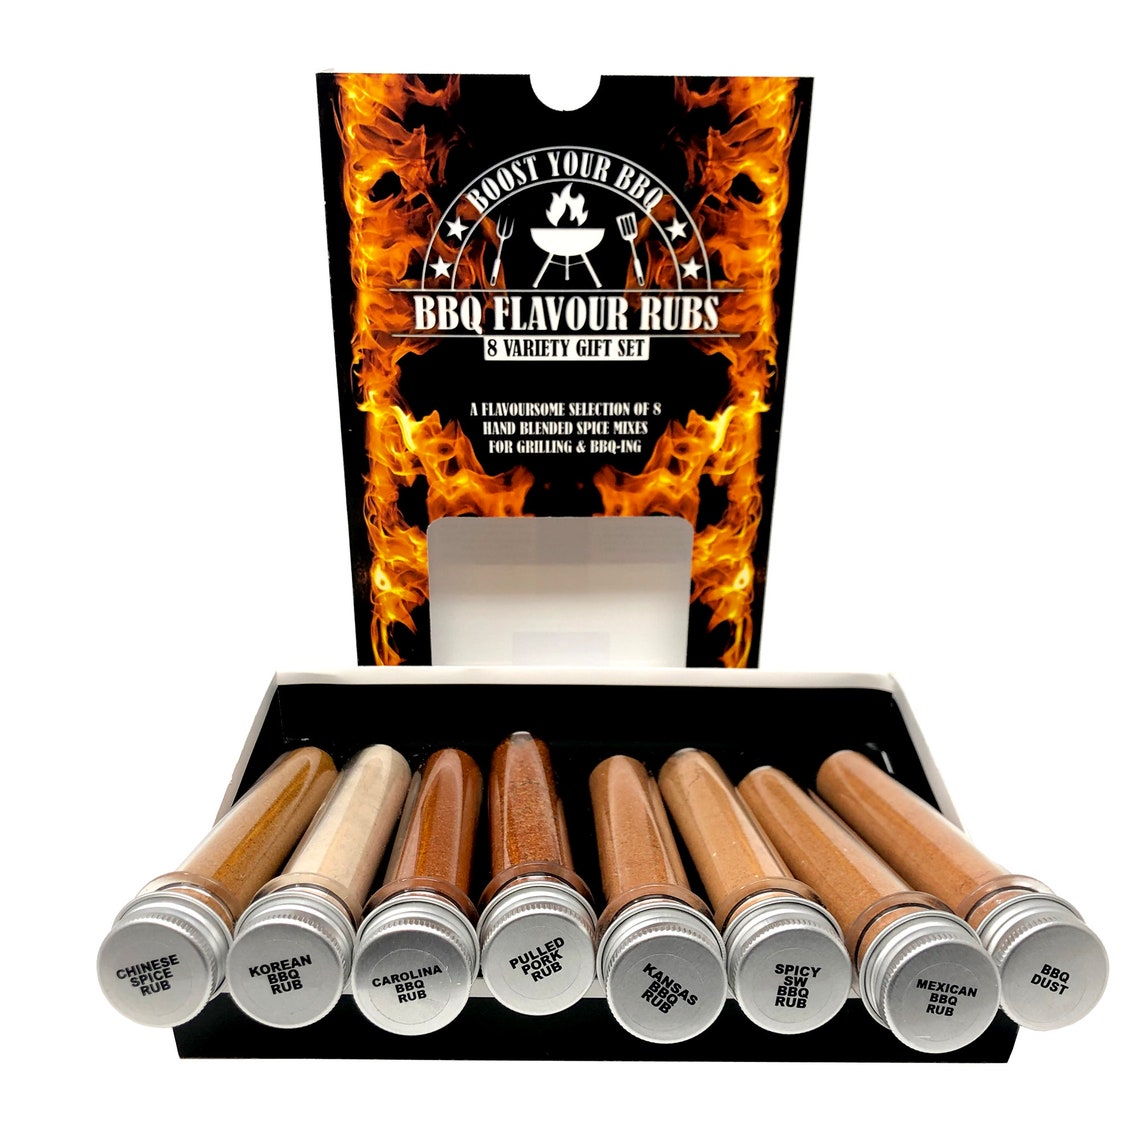 Gourmet BBQ Rub Gift Set Boost your barbecue with 8 hand